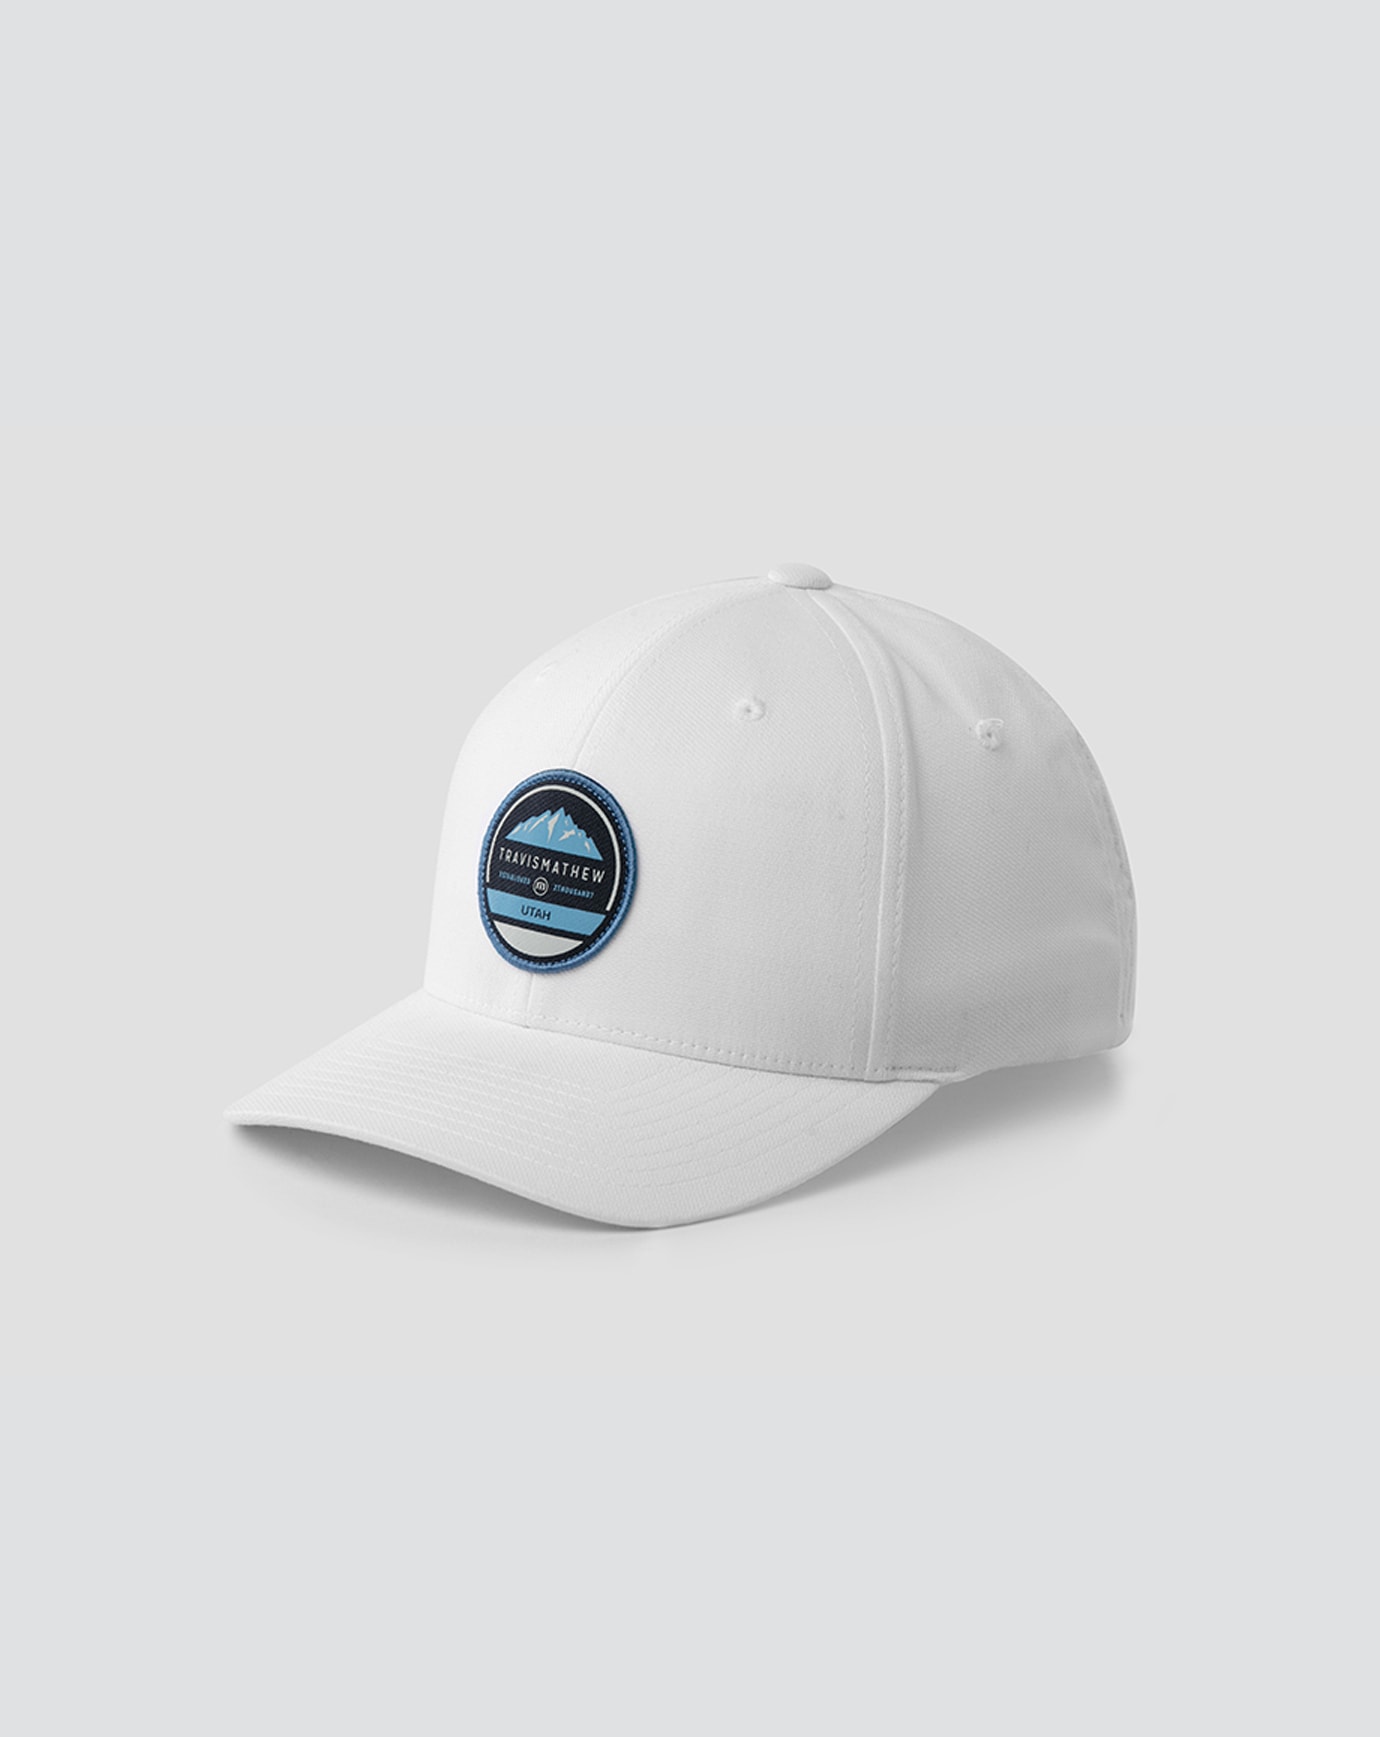 BIGHORN FITTED HAT Image Thumbnail 2